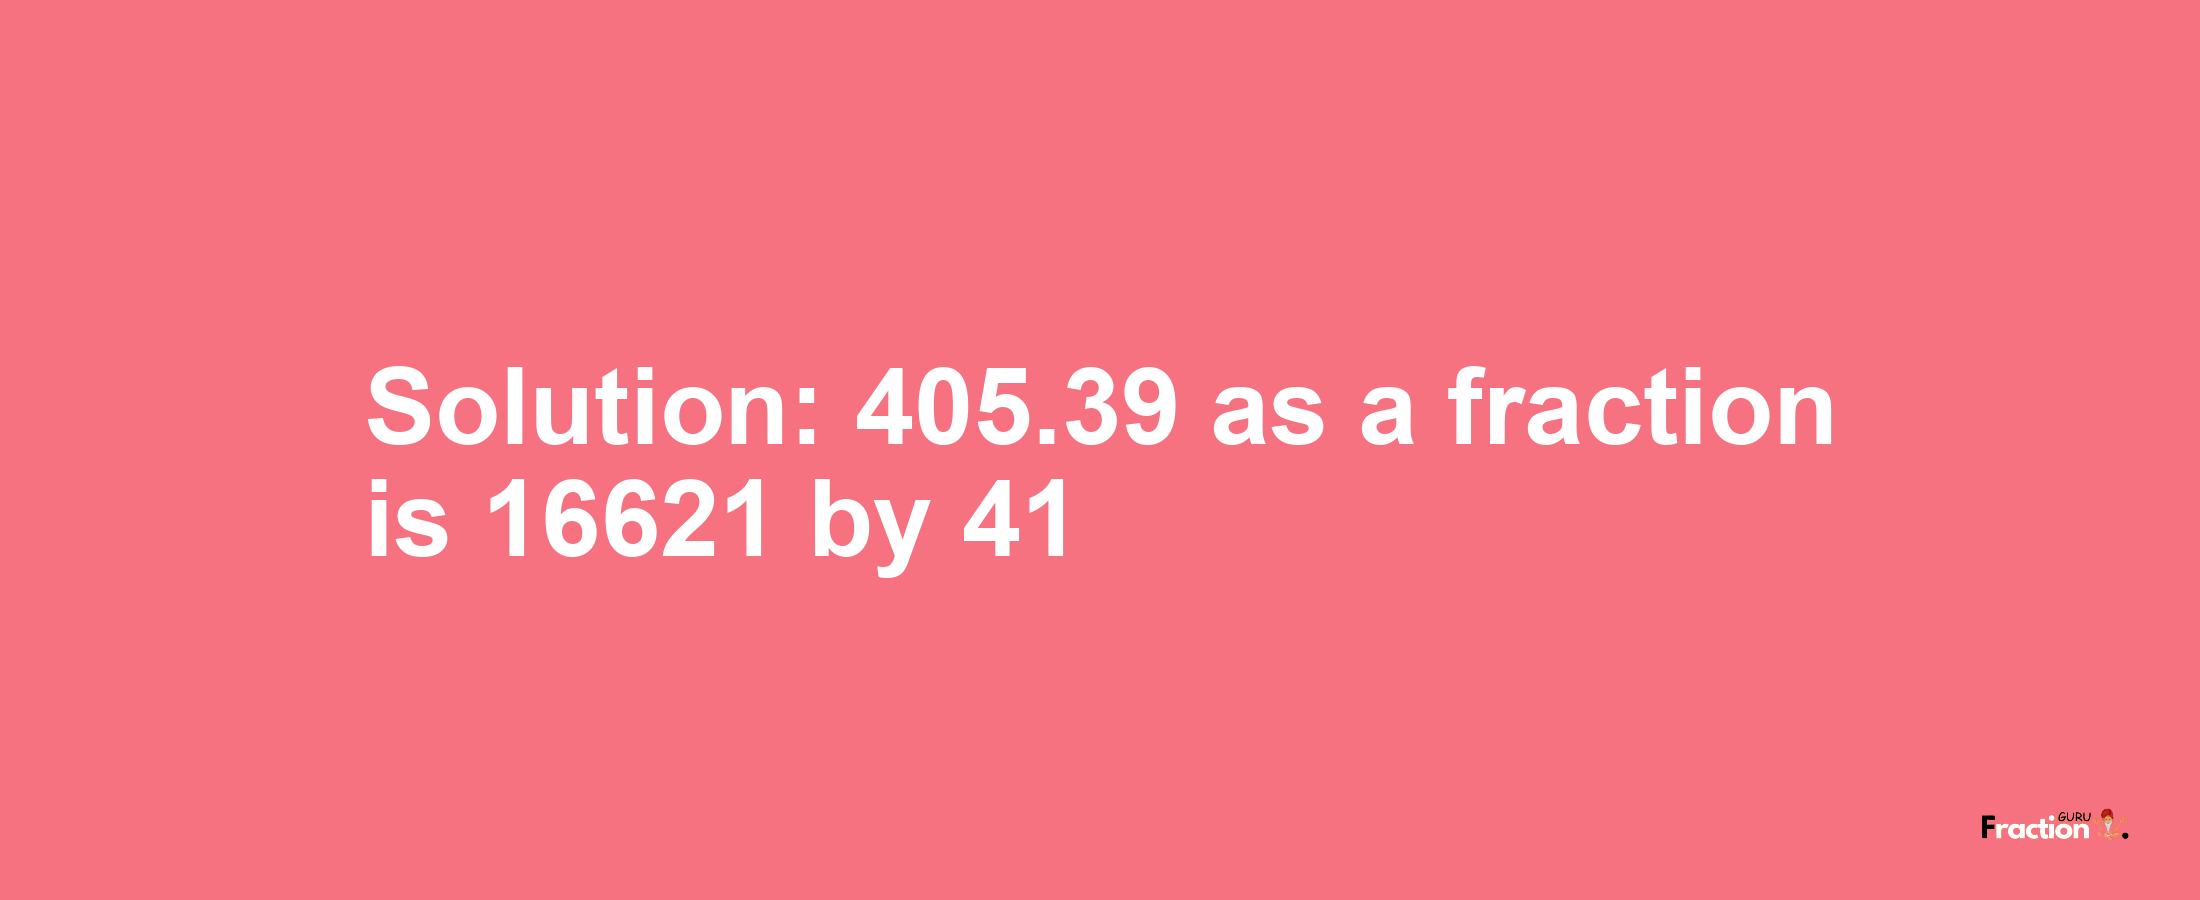 Solution:405.39 as a fraction is 16621/41